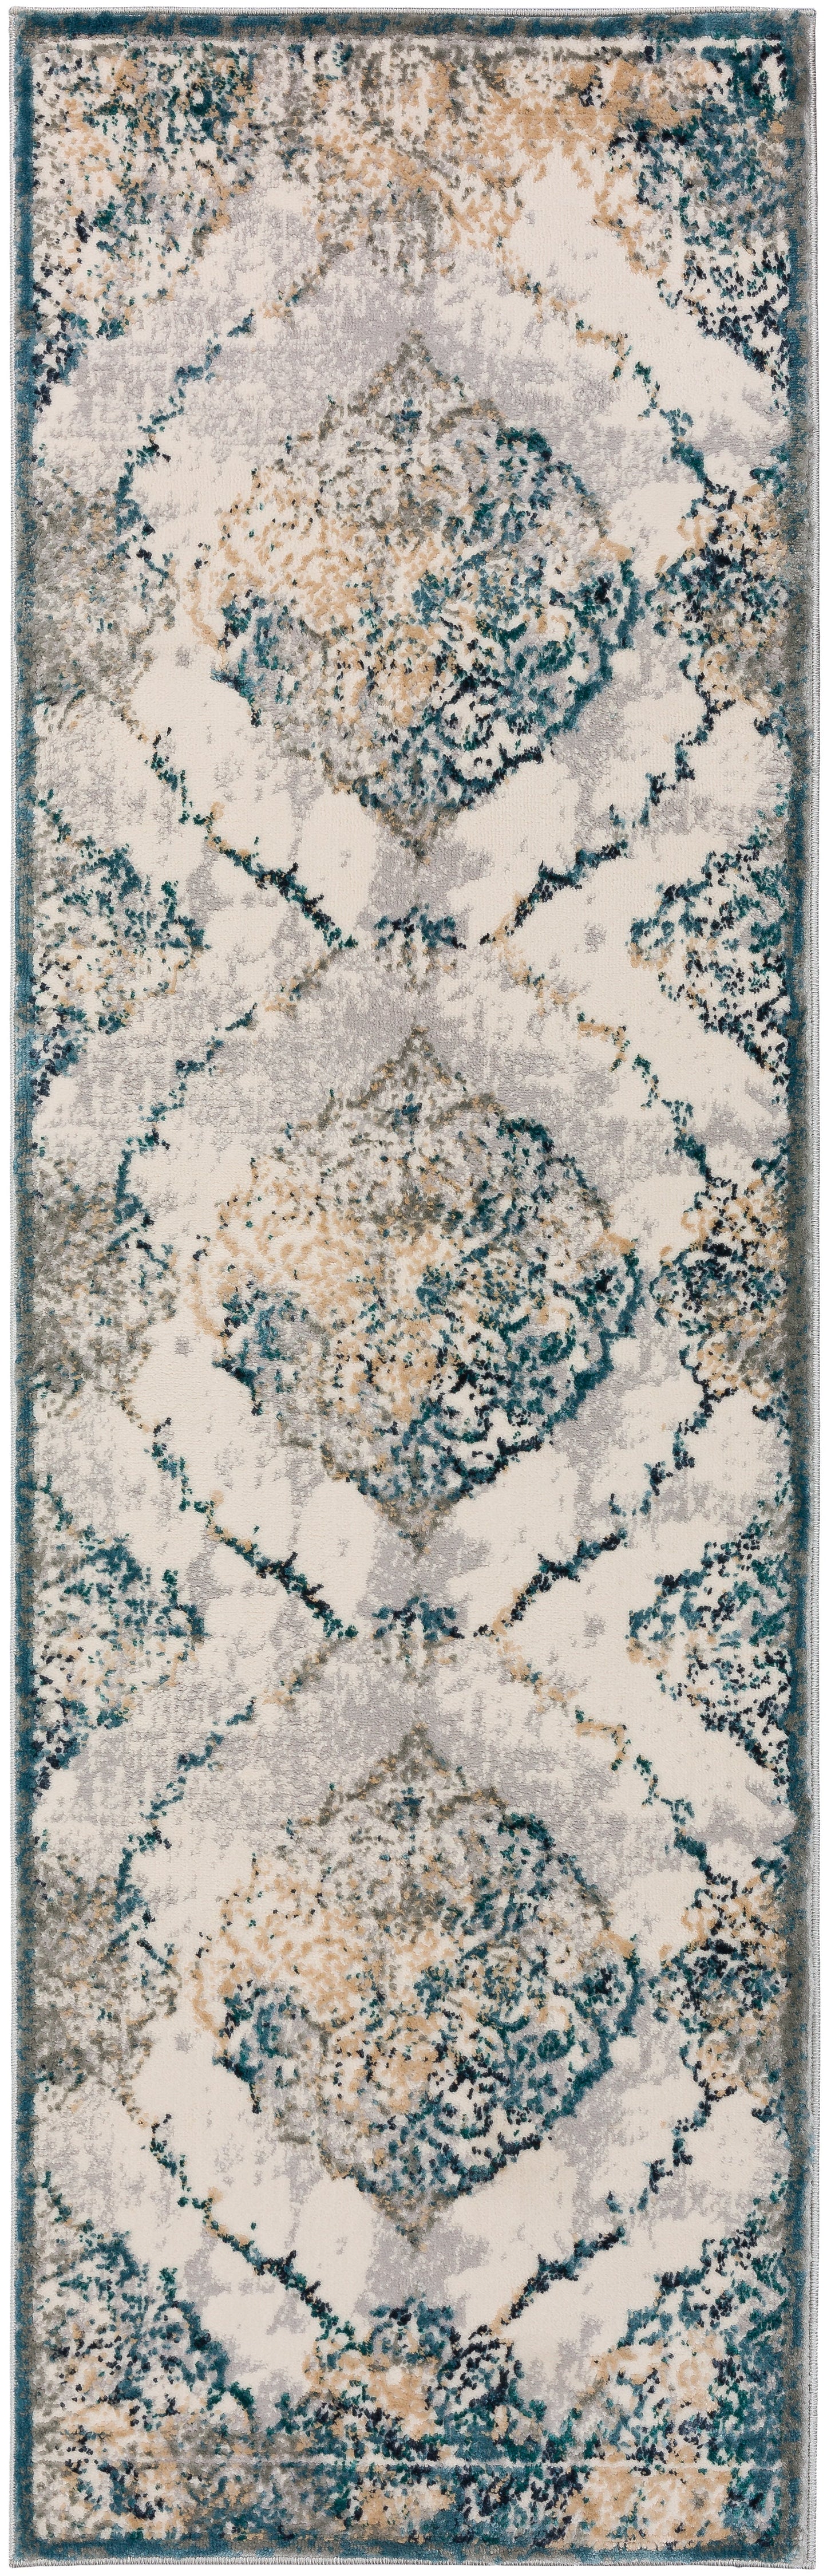 Karma KM23 Machine Woven Synthetic Blend Indoor Area Rug by Dalyn Rugs